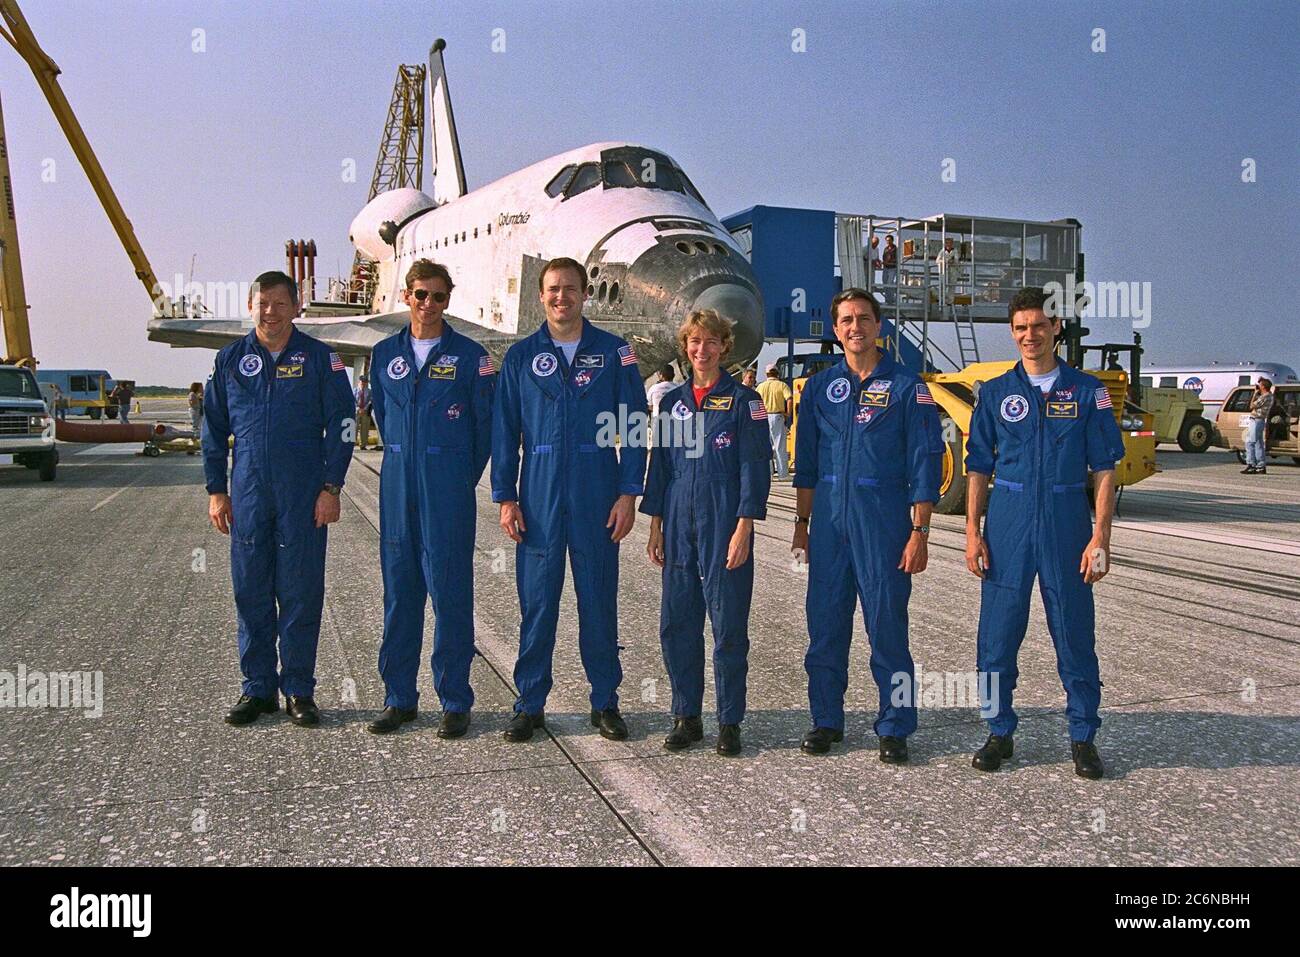 KENNEDY SPACE CENTER, FLA. -- The STS-94 flight crew poses in front of the  Space Shuttle orbiter Columbia after an end-of-mission landing on Runway 33 at KSC’s  Shuttle Landing Facility July 17 to complete the Microgravity Science Laboratory-1  (MSL-1) mission. They are (from left): Payload Specialist Roger K. Crouch; Mission  Specialist Michael L. Gernhardt;  Mission Commander  James D. Halsell Jr.; Pilot Susan  L. Still; Mission Specialist Donald A. Thomas; and Payload Specialist Gregory T.  Linteris Stock Photo